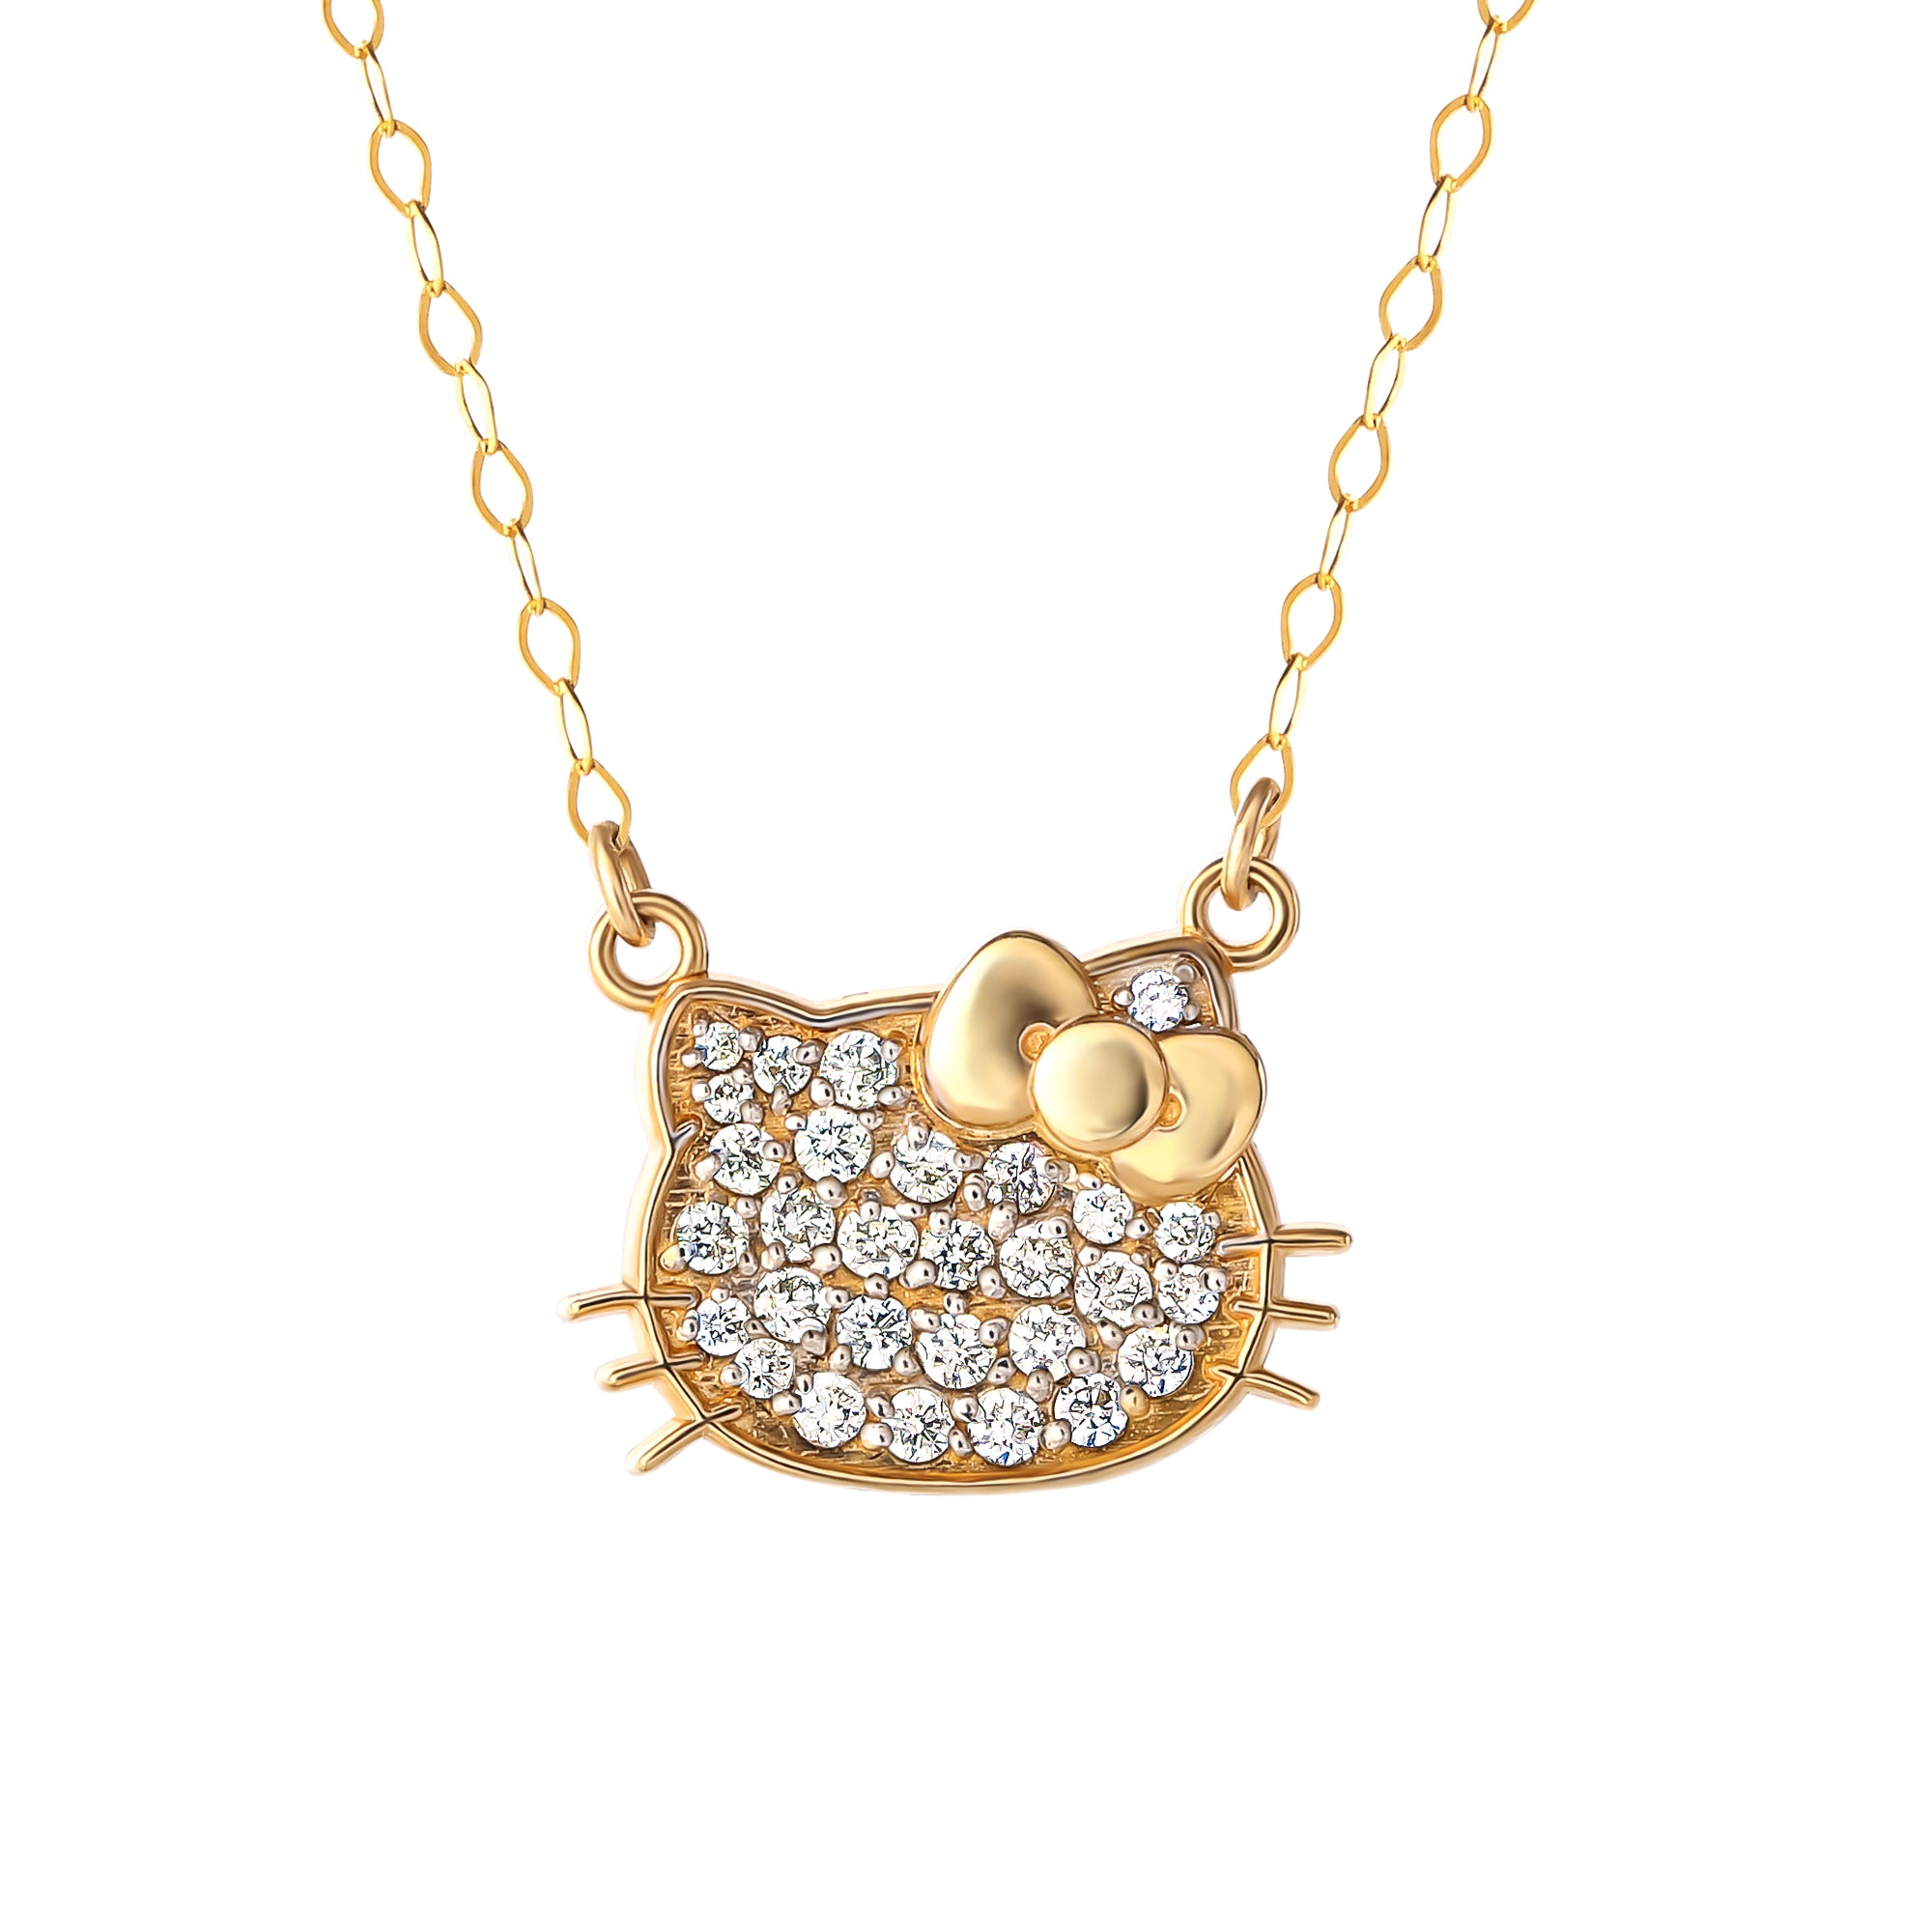 Buy Hello Kitty Gold Necklace With White Gemstone Momoberry Sanrio Online  in India - Etsy